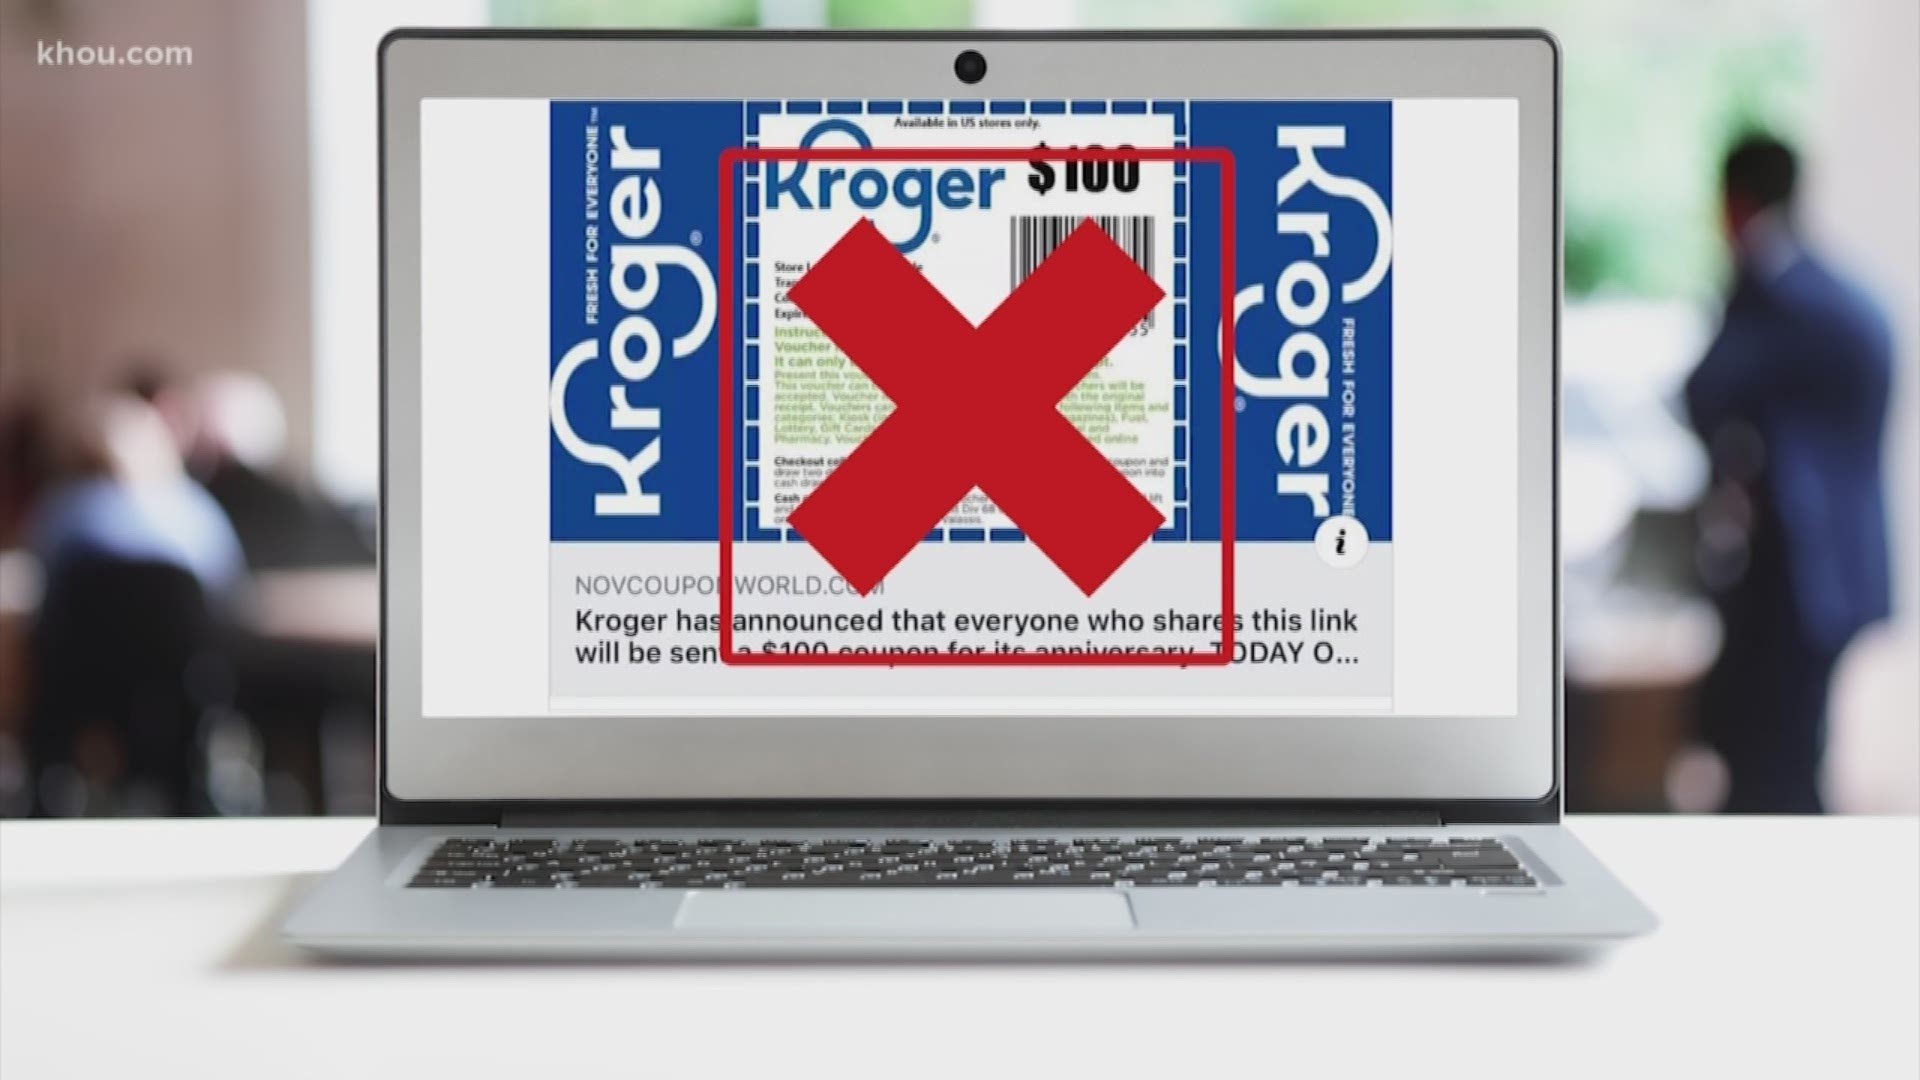 Verify Is the 100 Kroger coupon real?